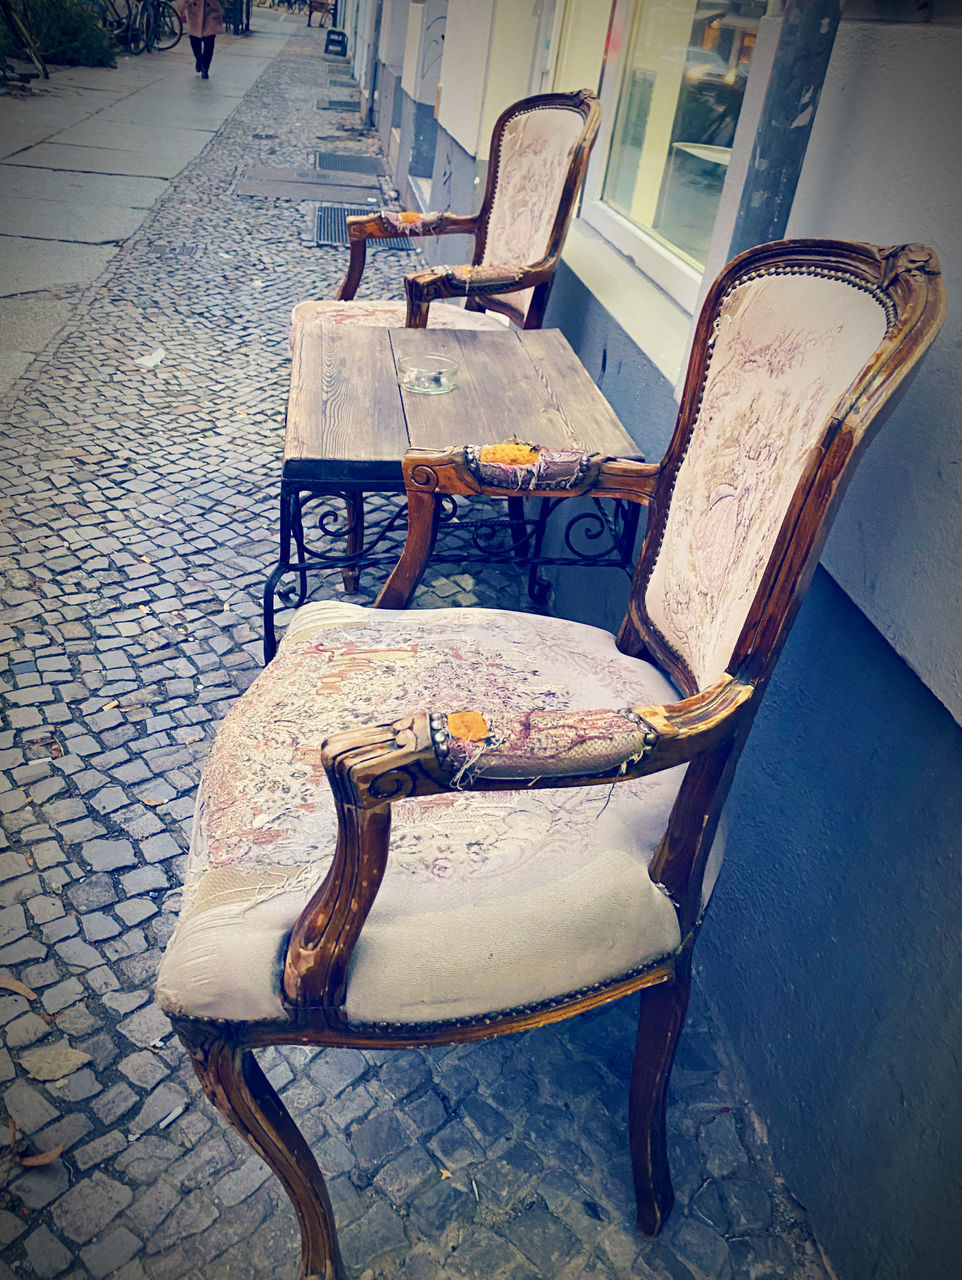 chair, seat, blue, furniture, no people, architecture, street, art, table, city, footpath, day, empty, absence, sidewalk, cobblestone, outdoors